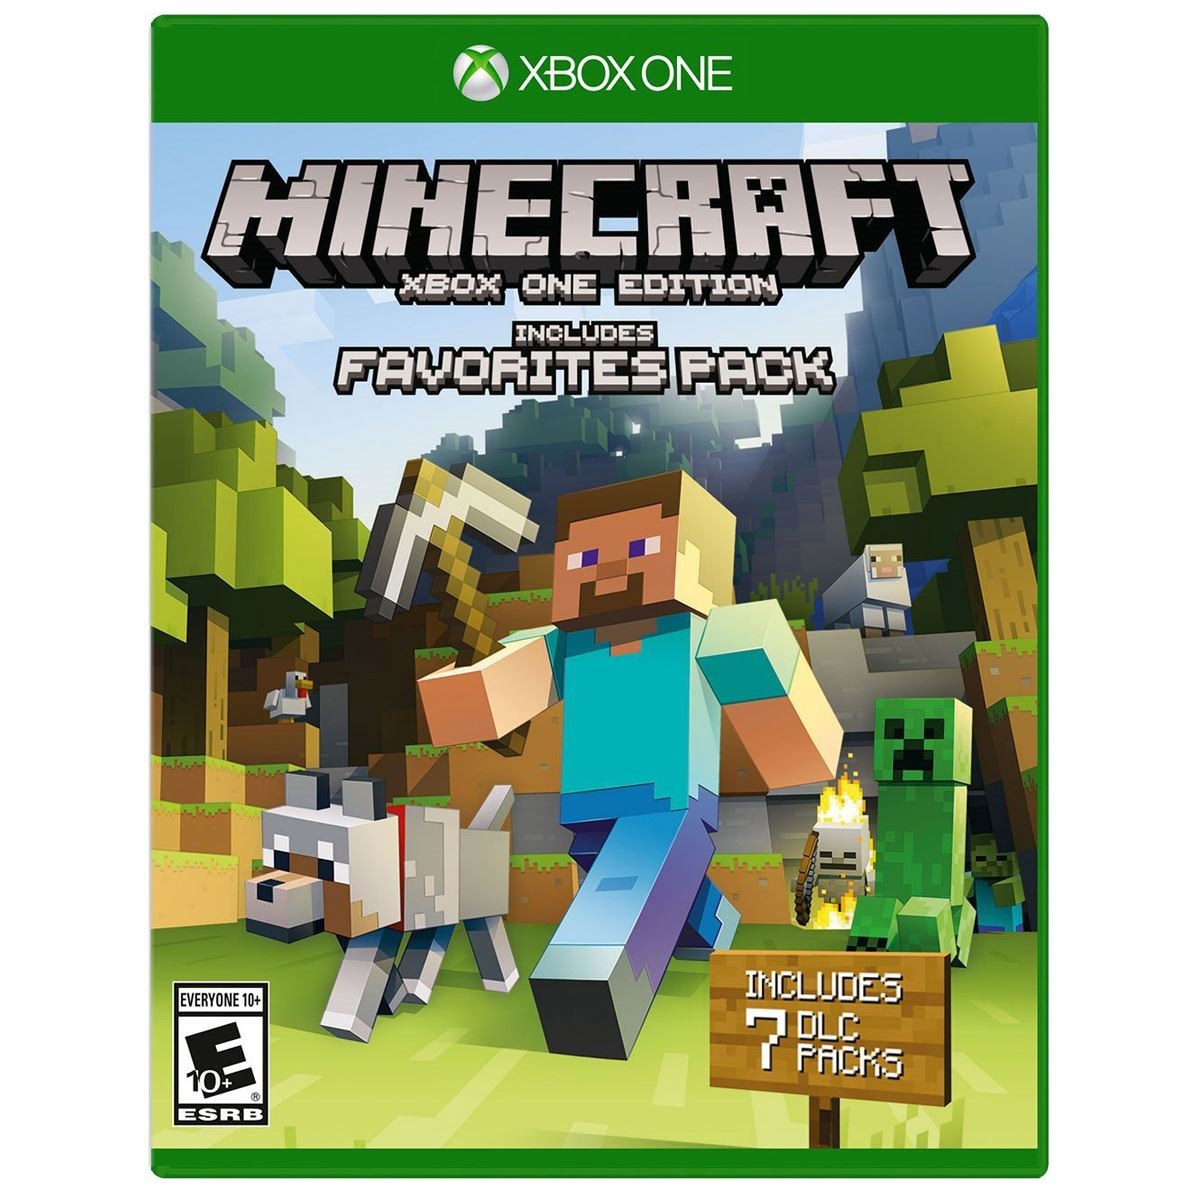 Minecraft: Xbox One Edition â Favorites Pack